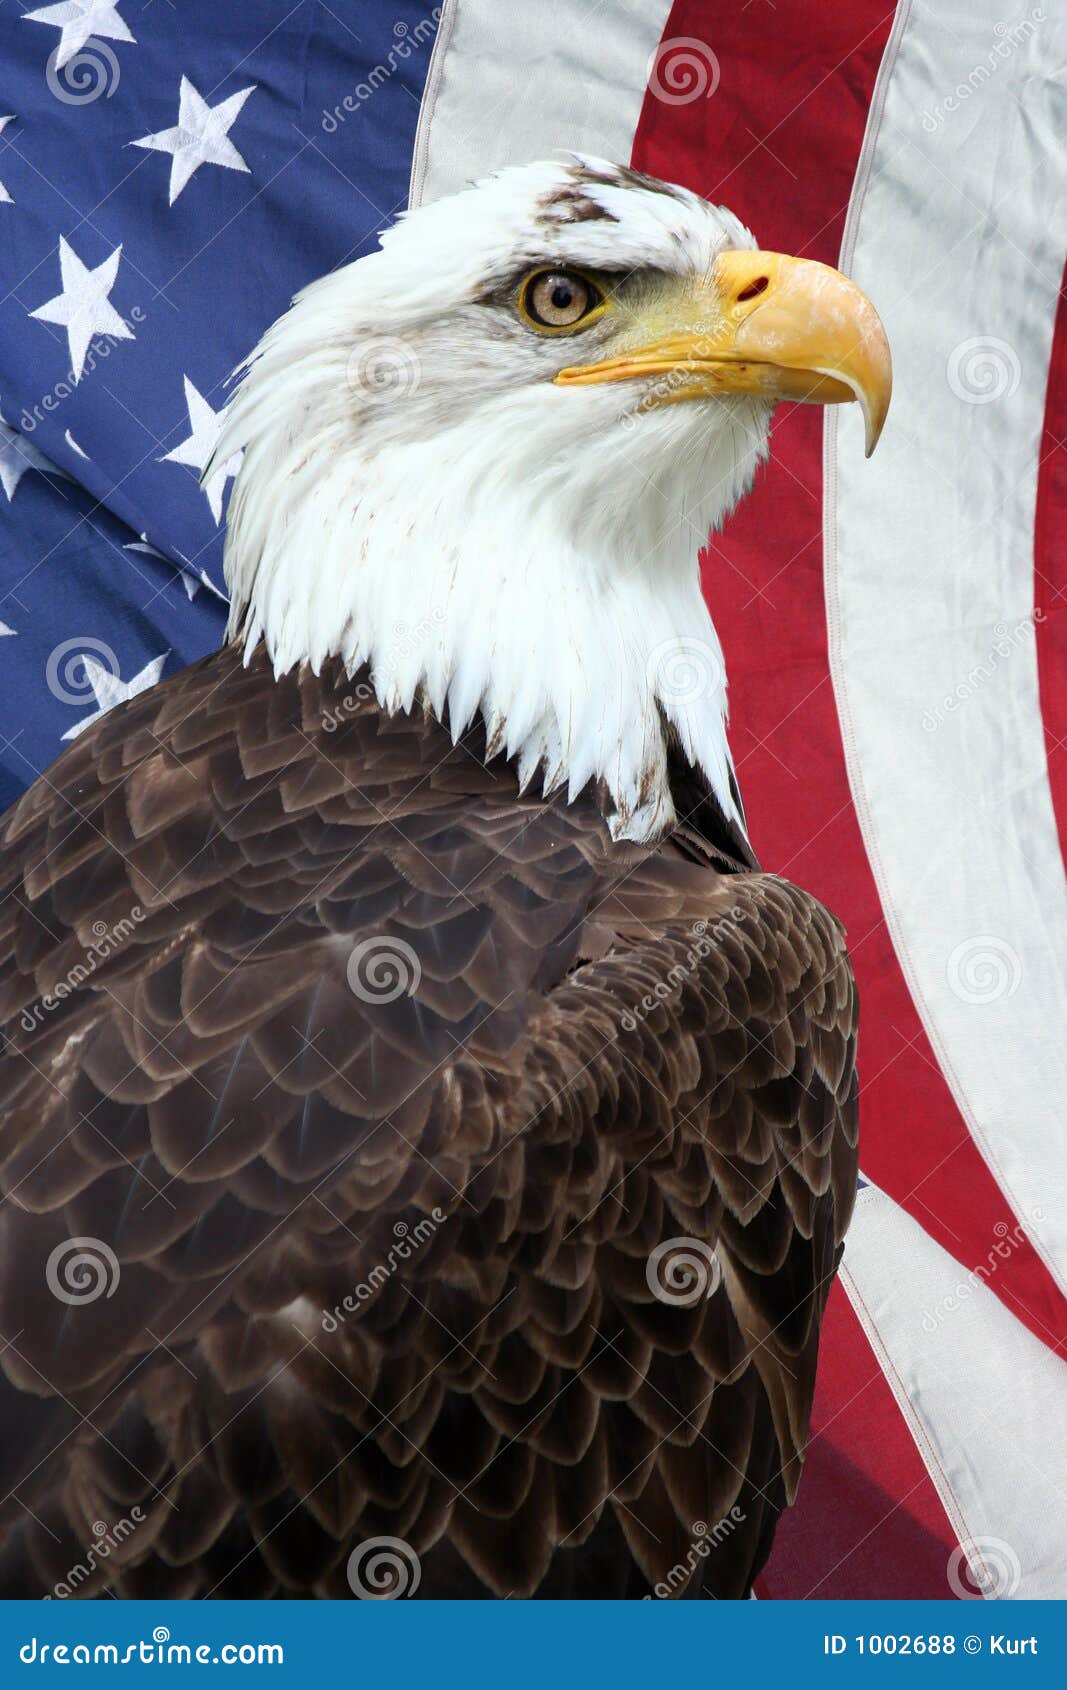 American eagle - Wiktionary